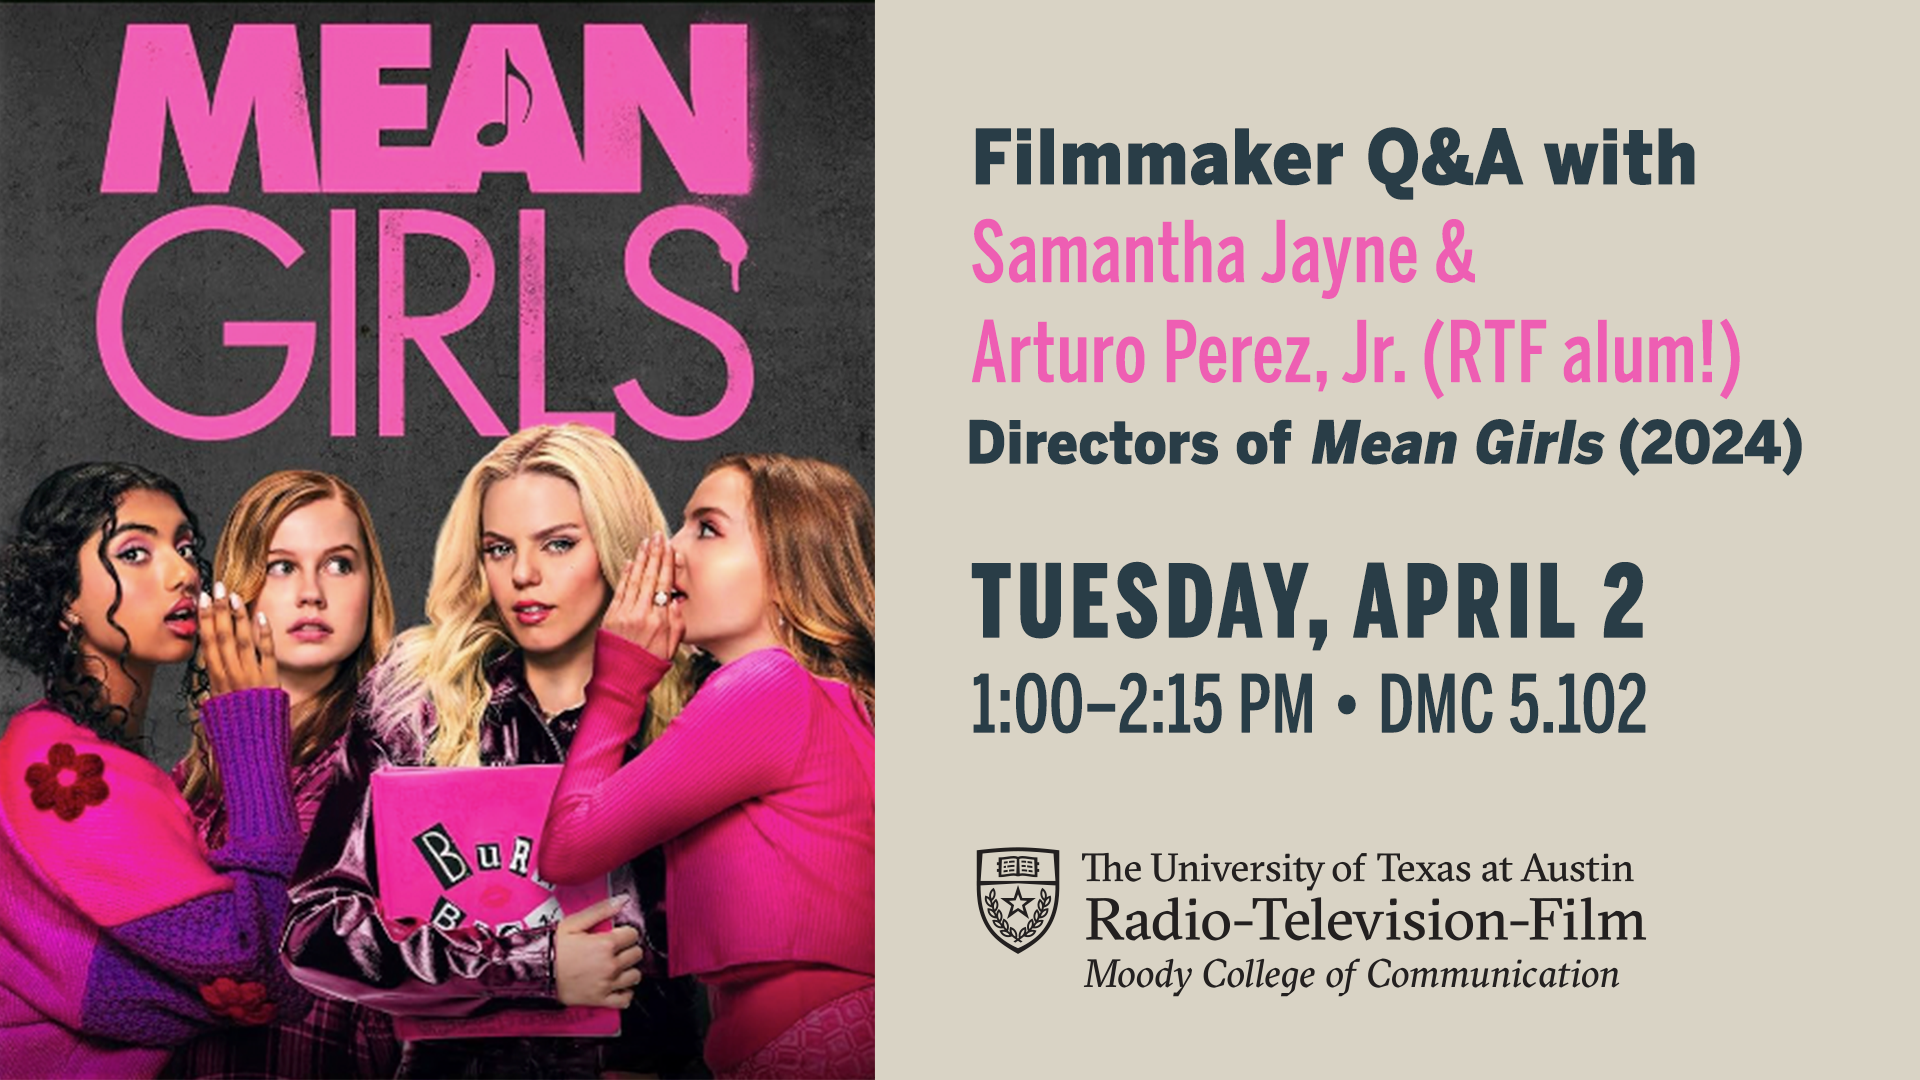 Q&A with "Mean Girls" directors on April 2 at 1 pm in DMC 5.102